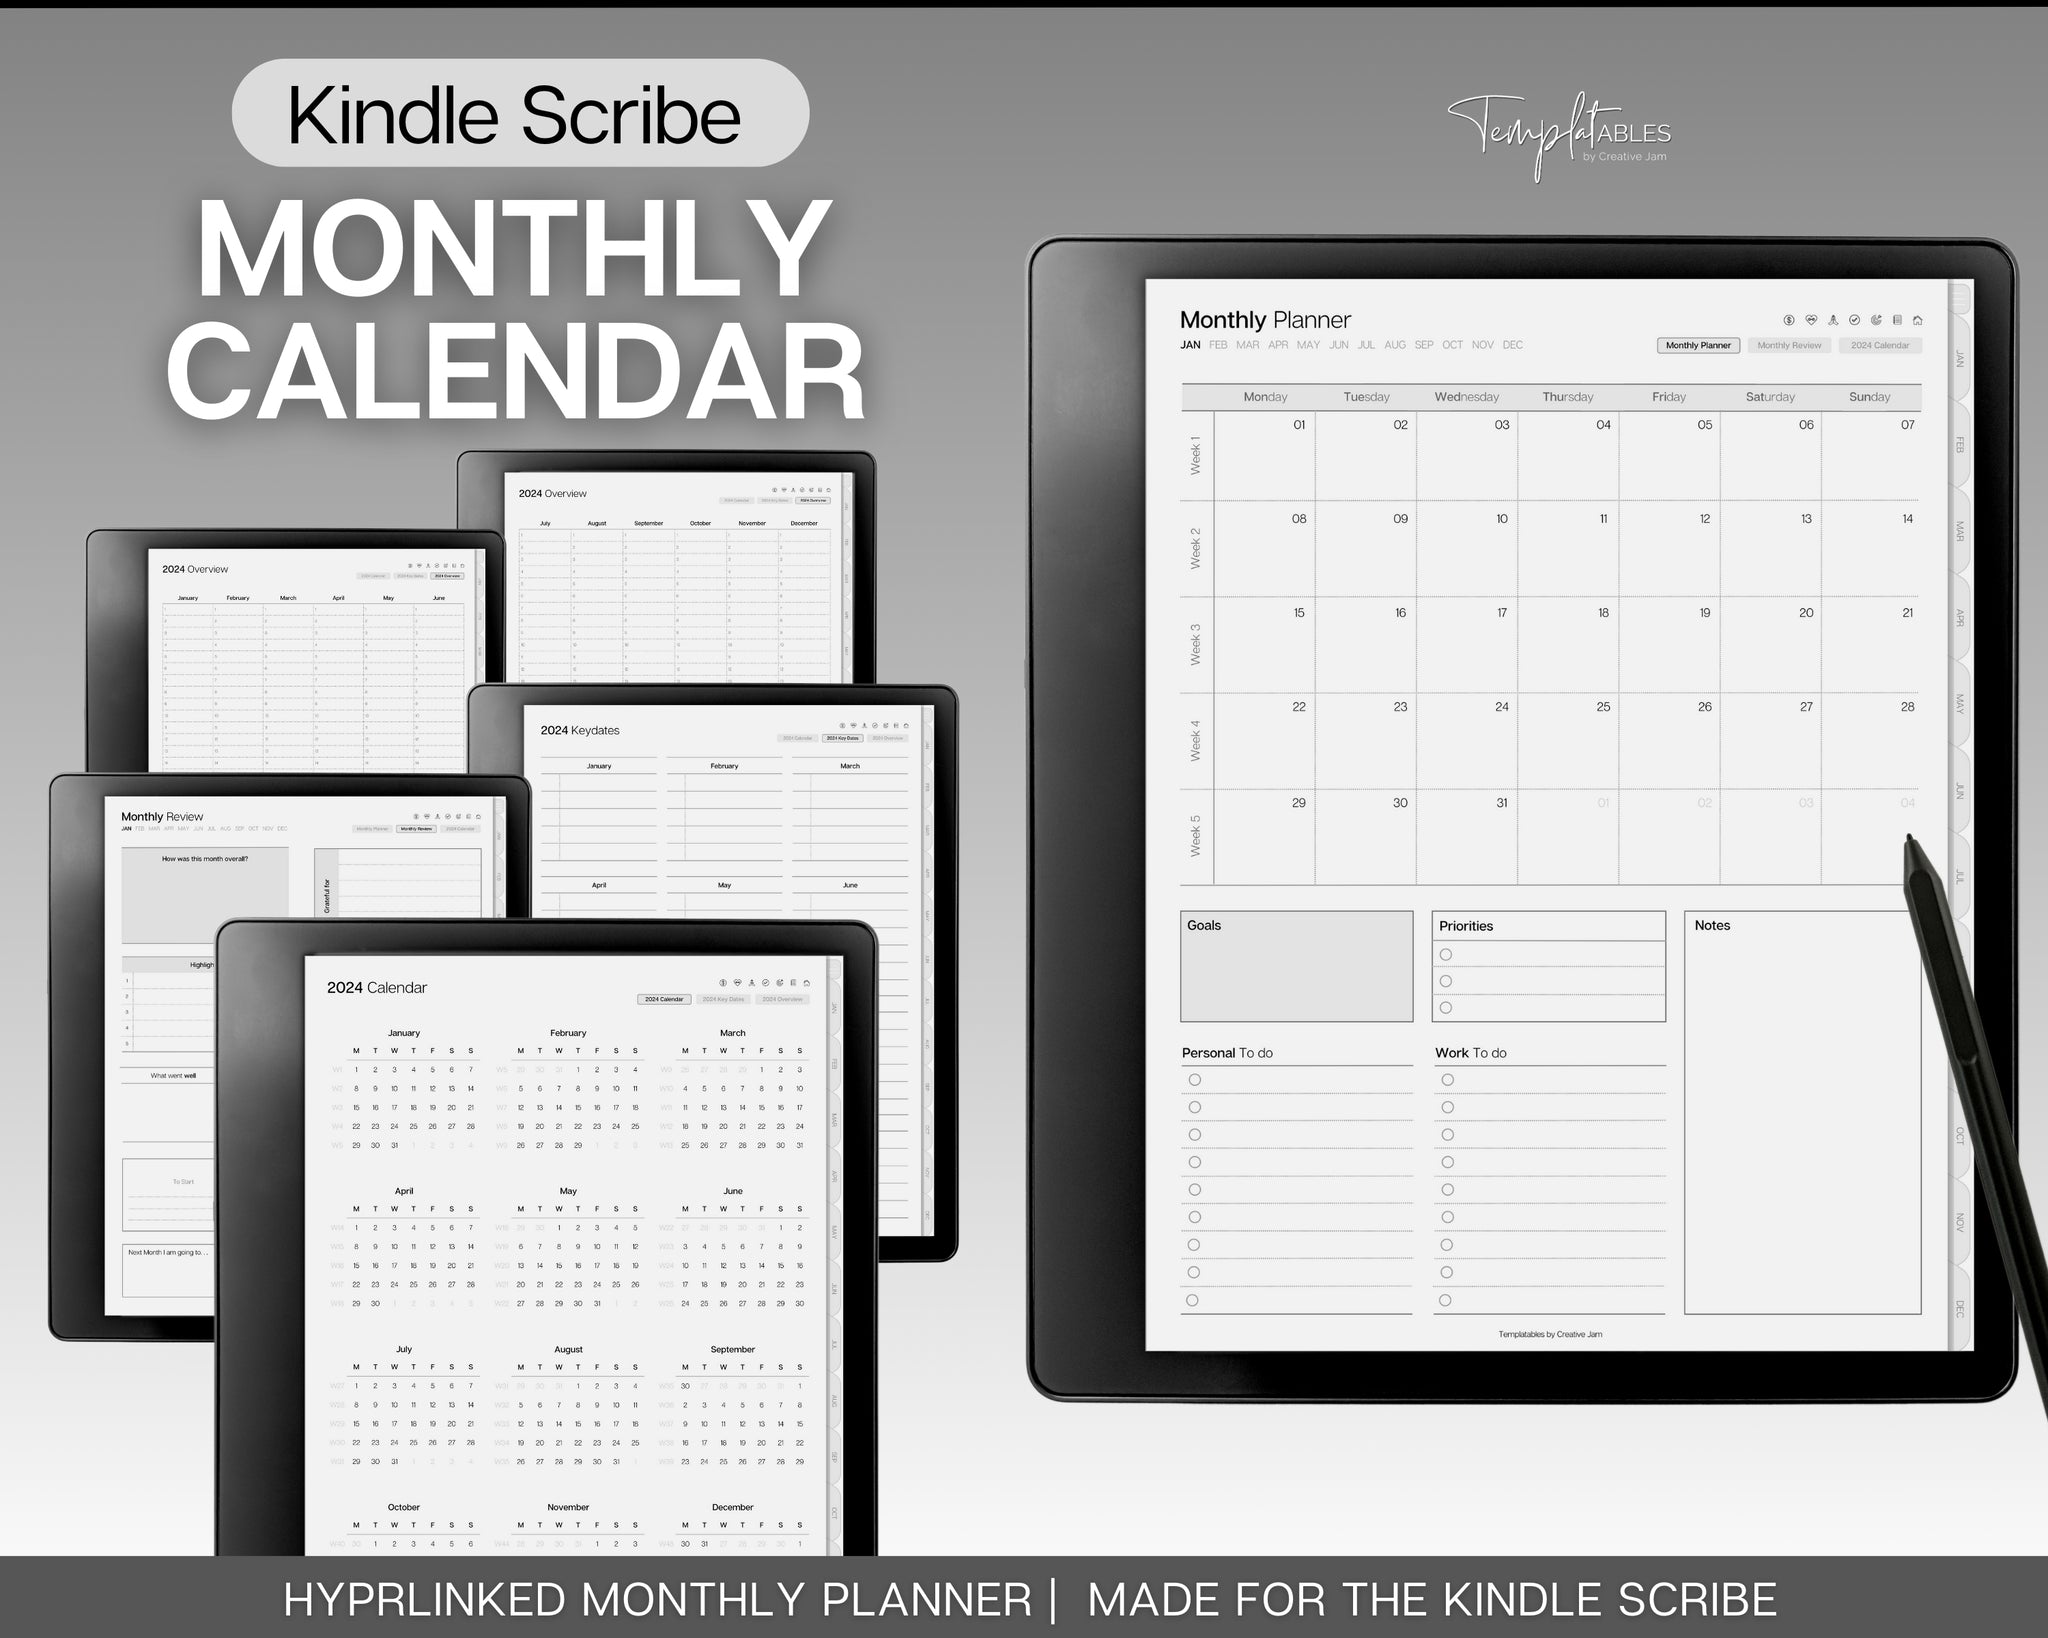 2024 Kindle Scribe Monthly Planner